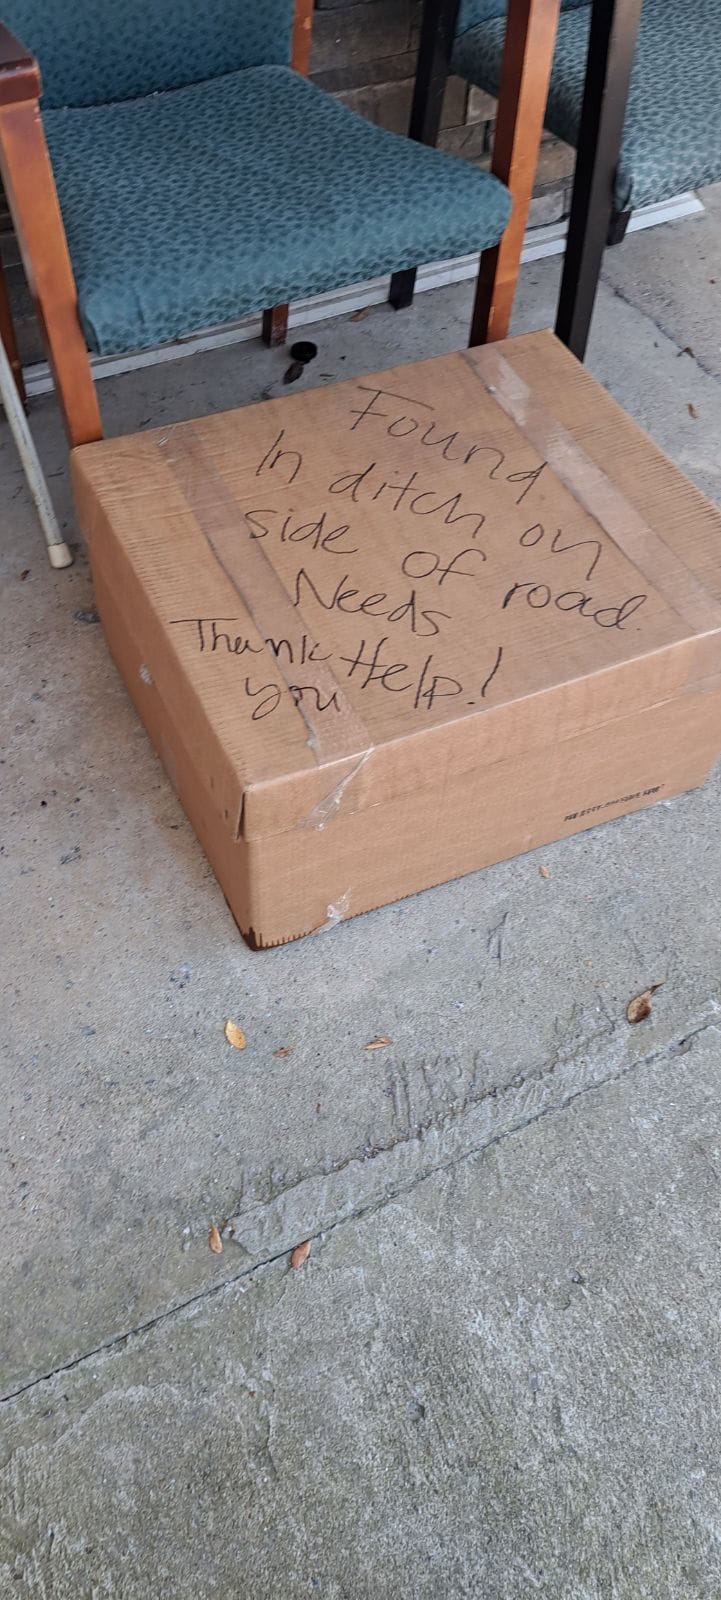 a box with a written sign